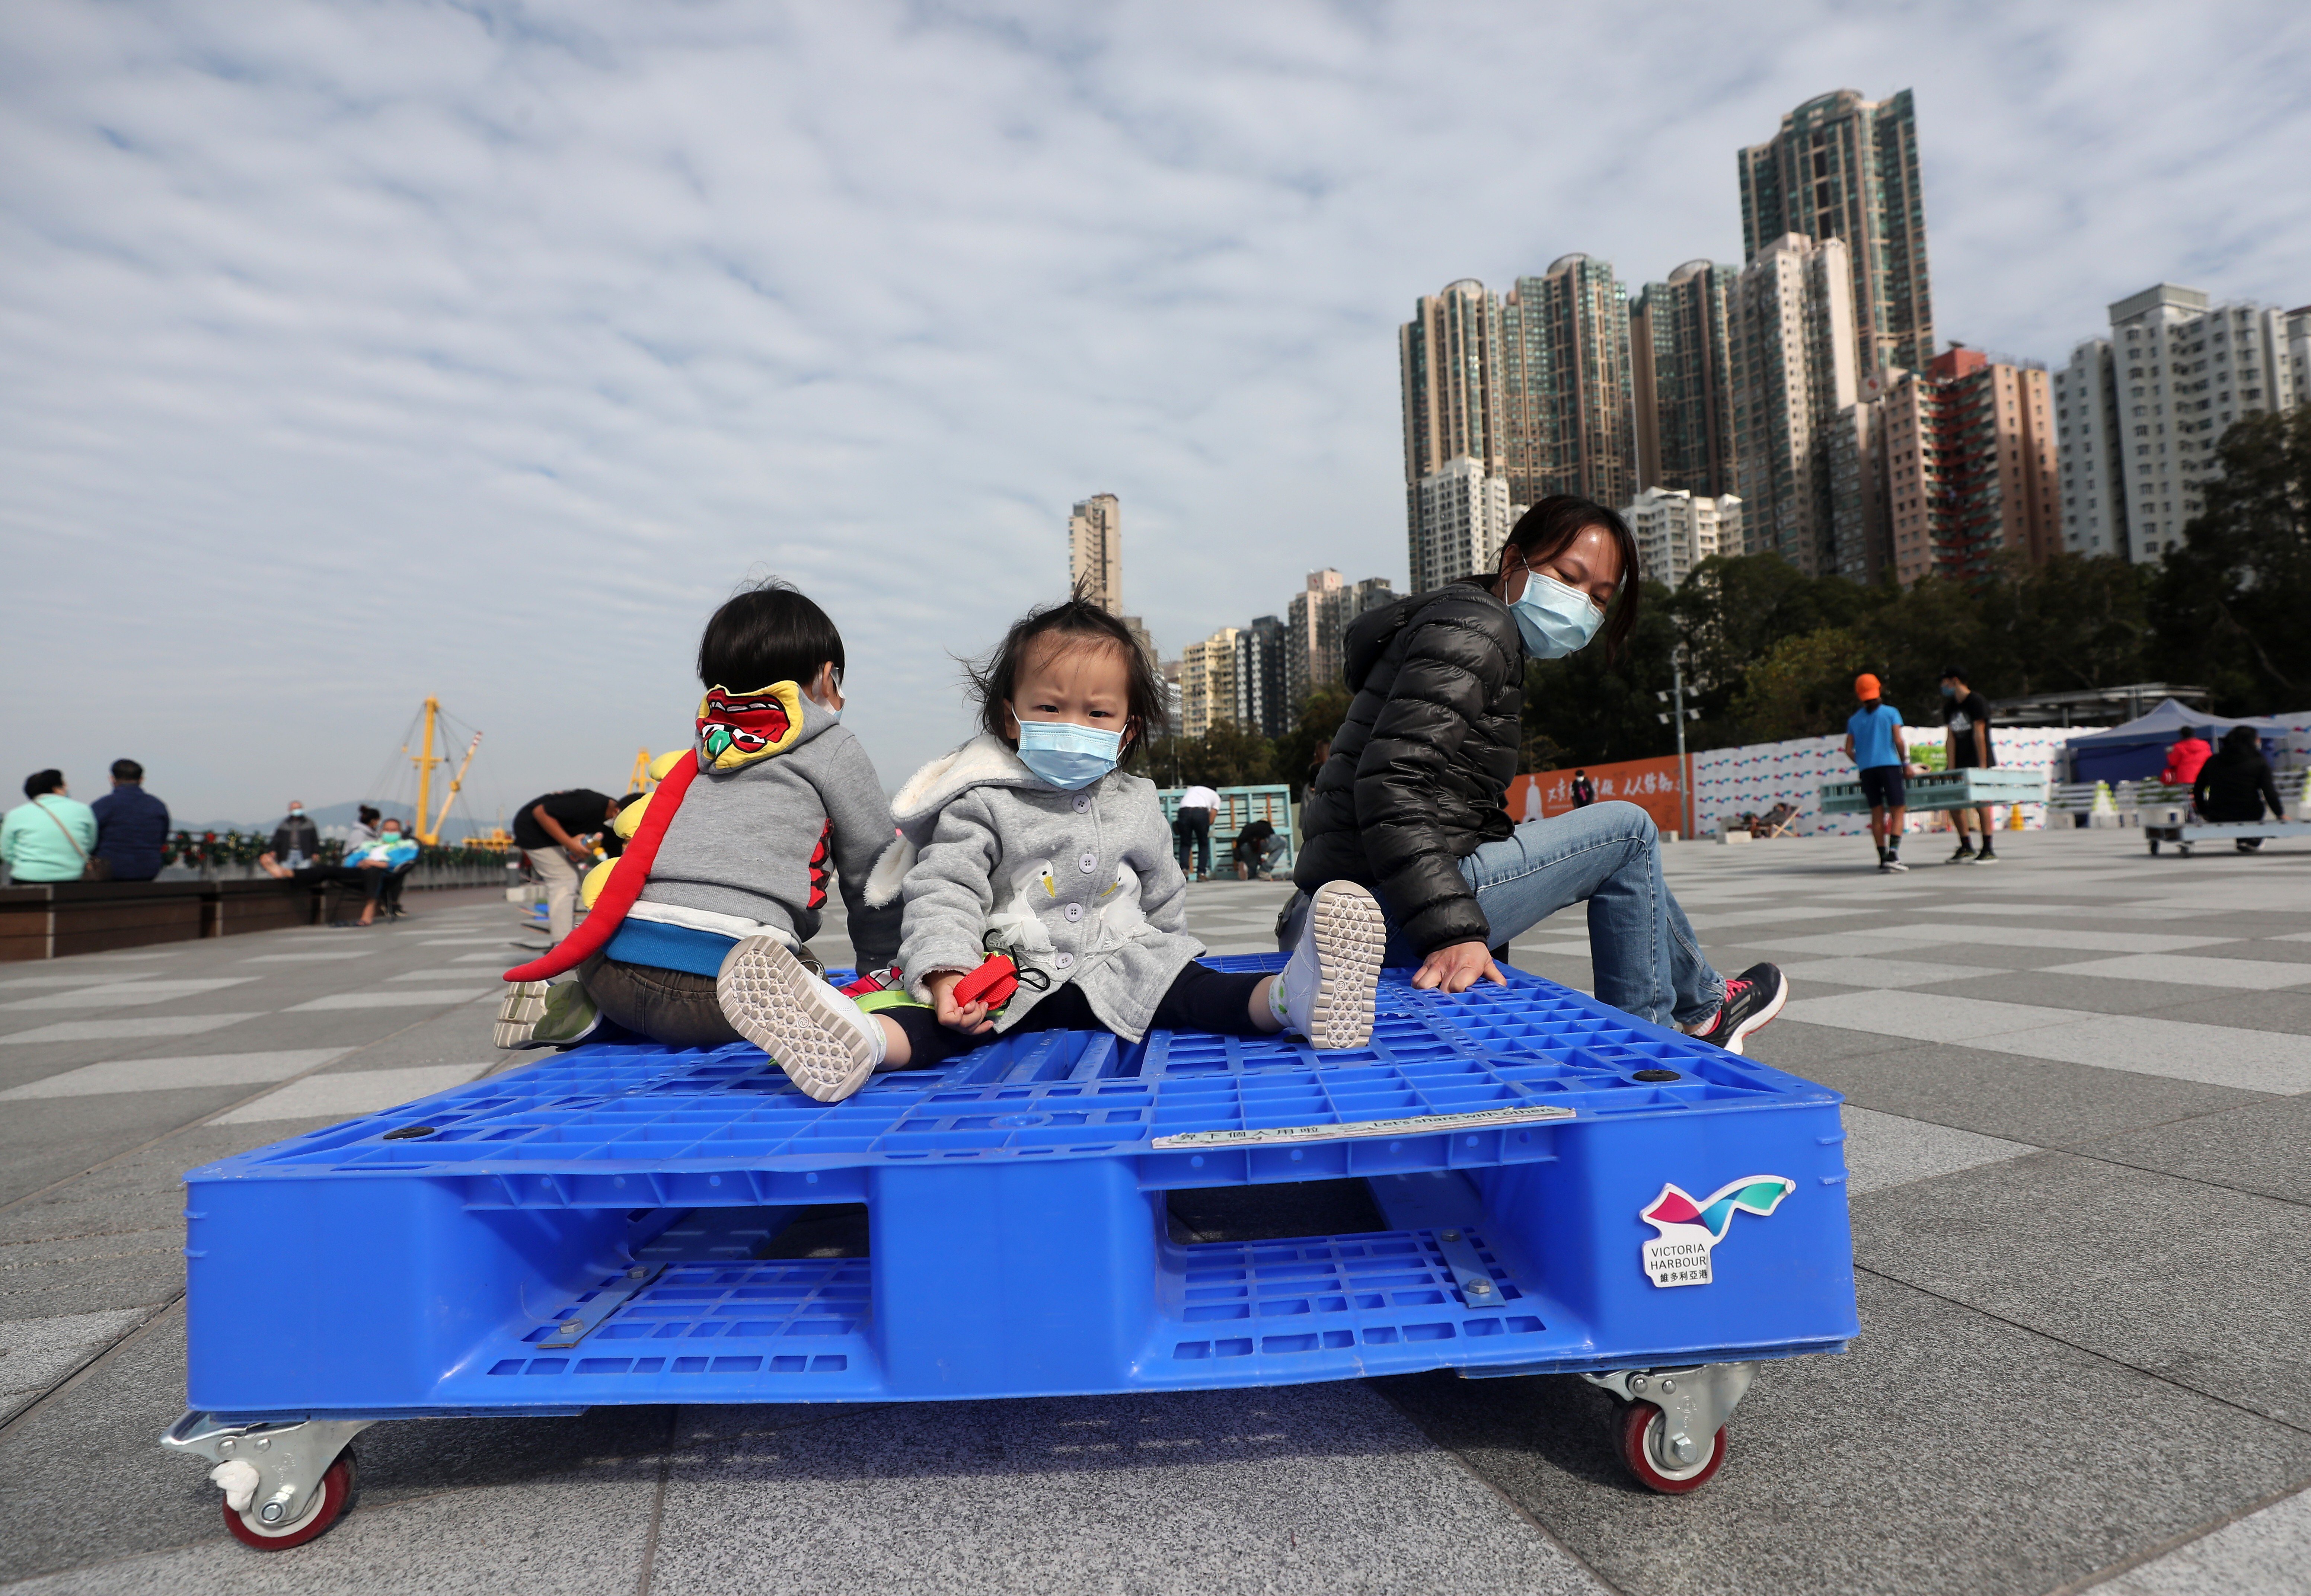 Adults and children enjoy a sunny day at Belcher Bay Promenade in Kennedy Town, Hong Kong. Photo: Xiaomei Chen